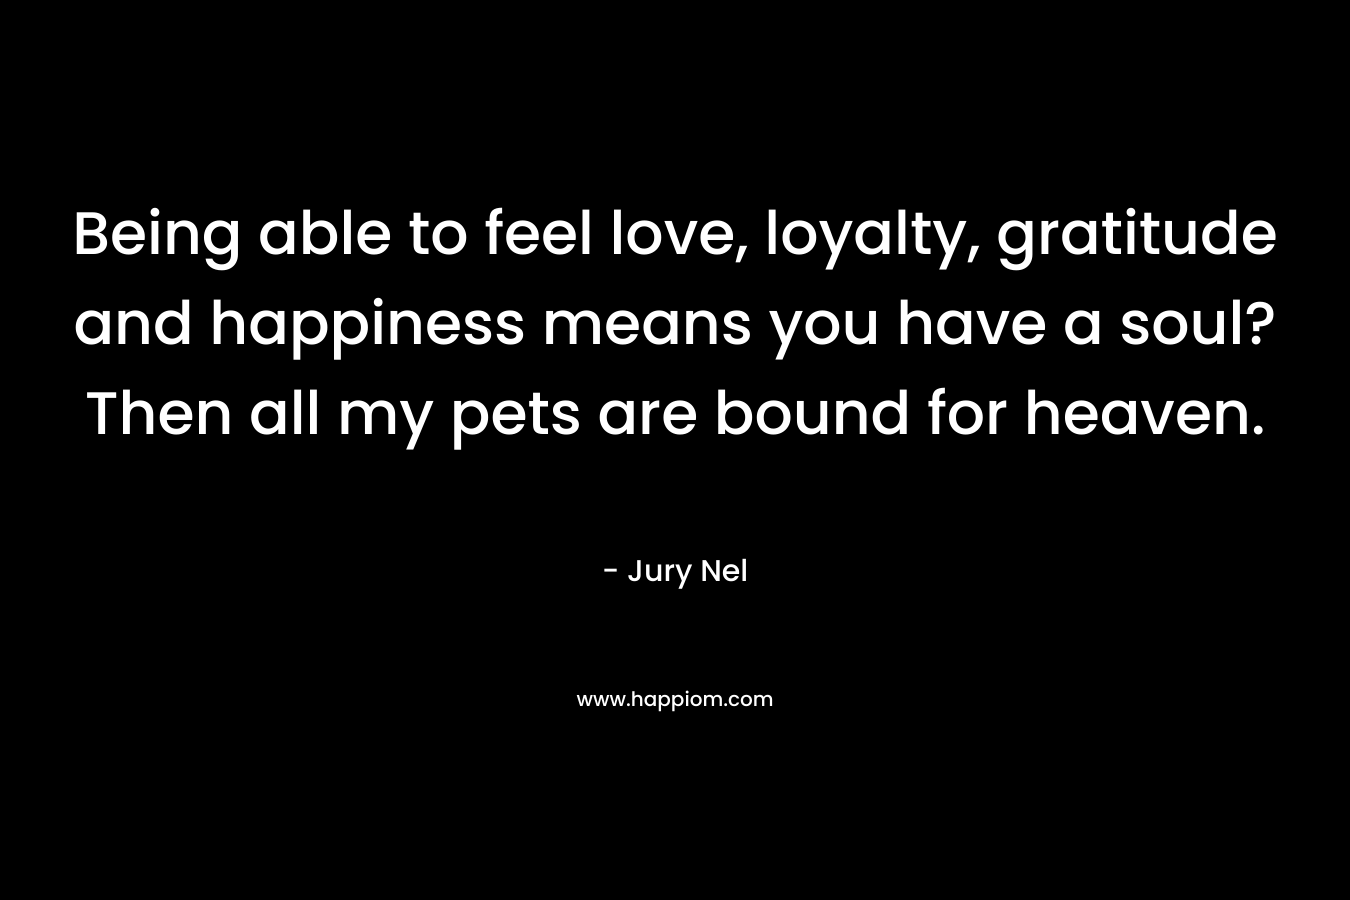 Being able to feel love, loyalty, gratitude and happiness means you have a soul? Then all my pets are bound for heaven.